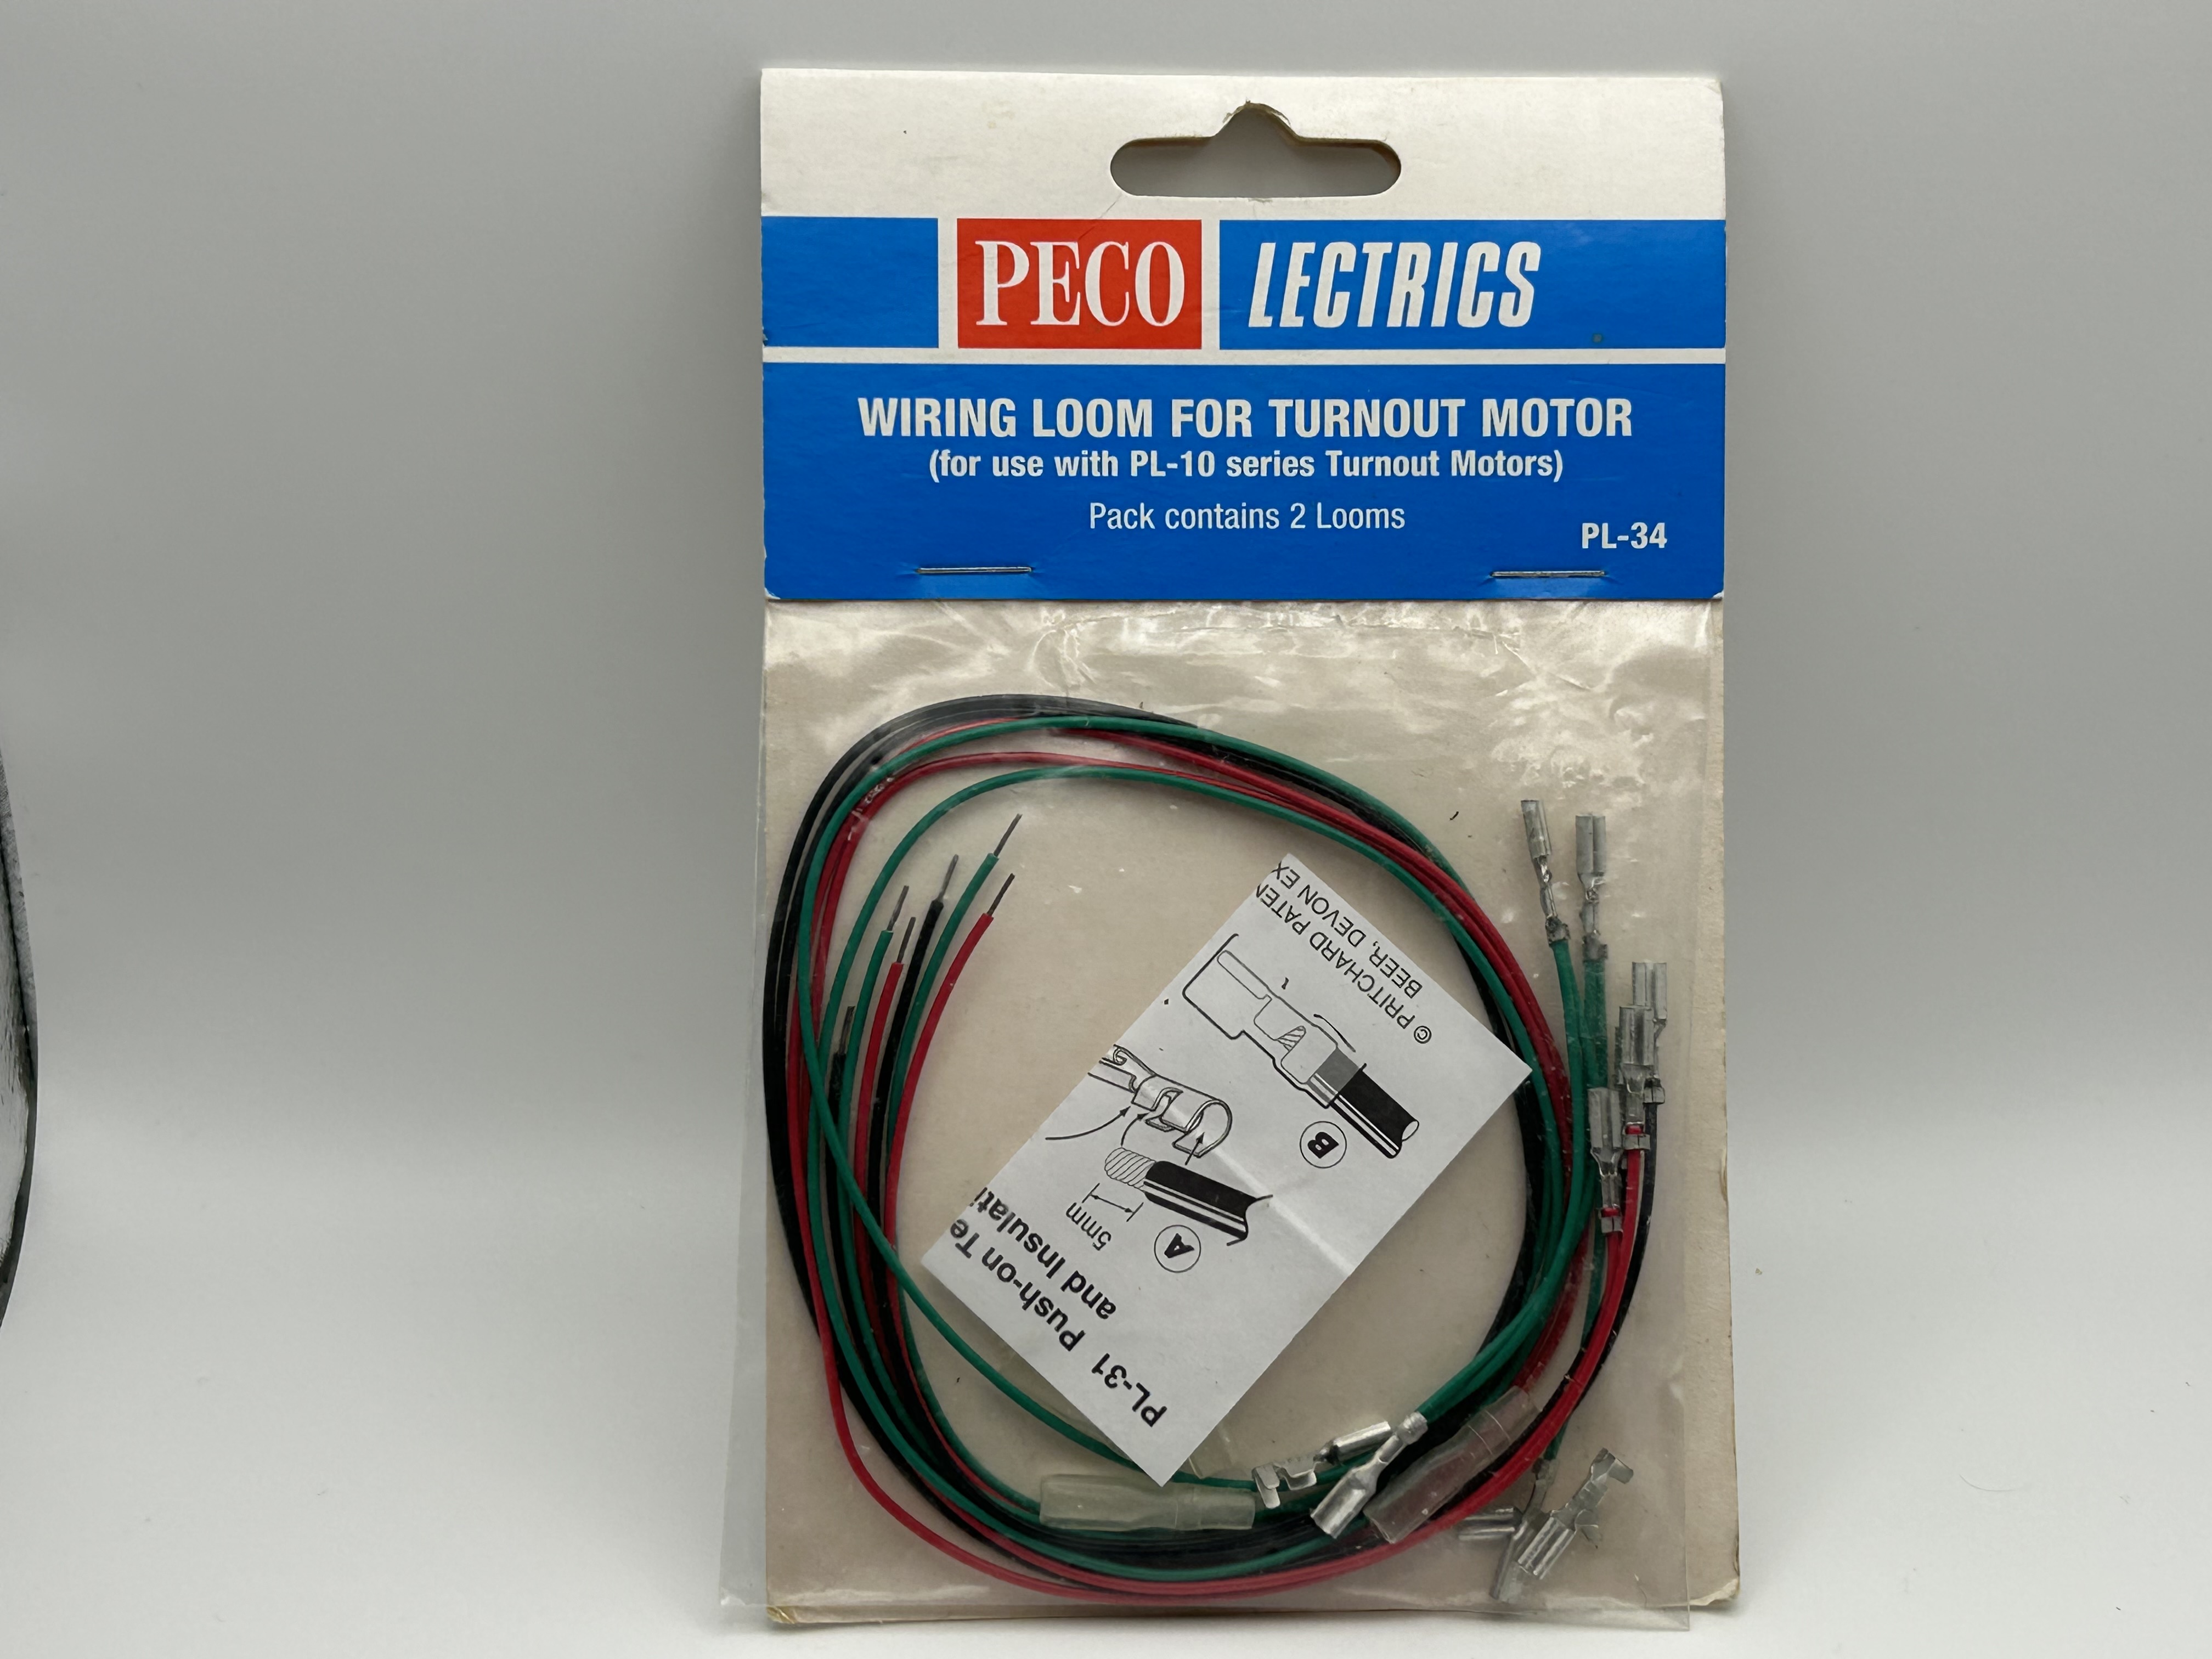 PECO Lectrics - PL-34 - Pre-Wired Wiring Loom for turnout motor